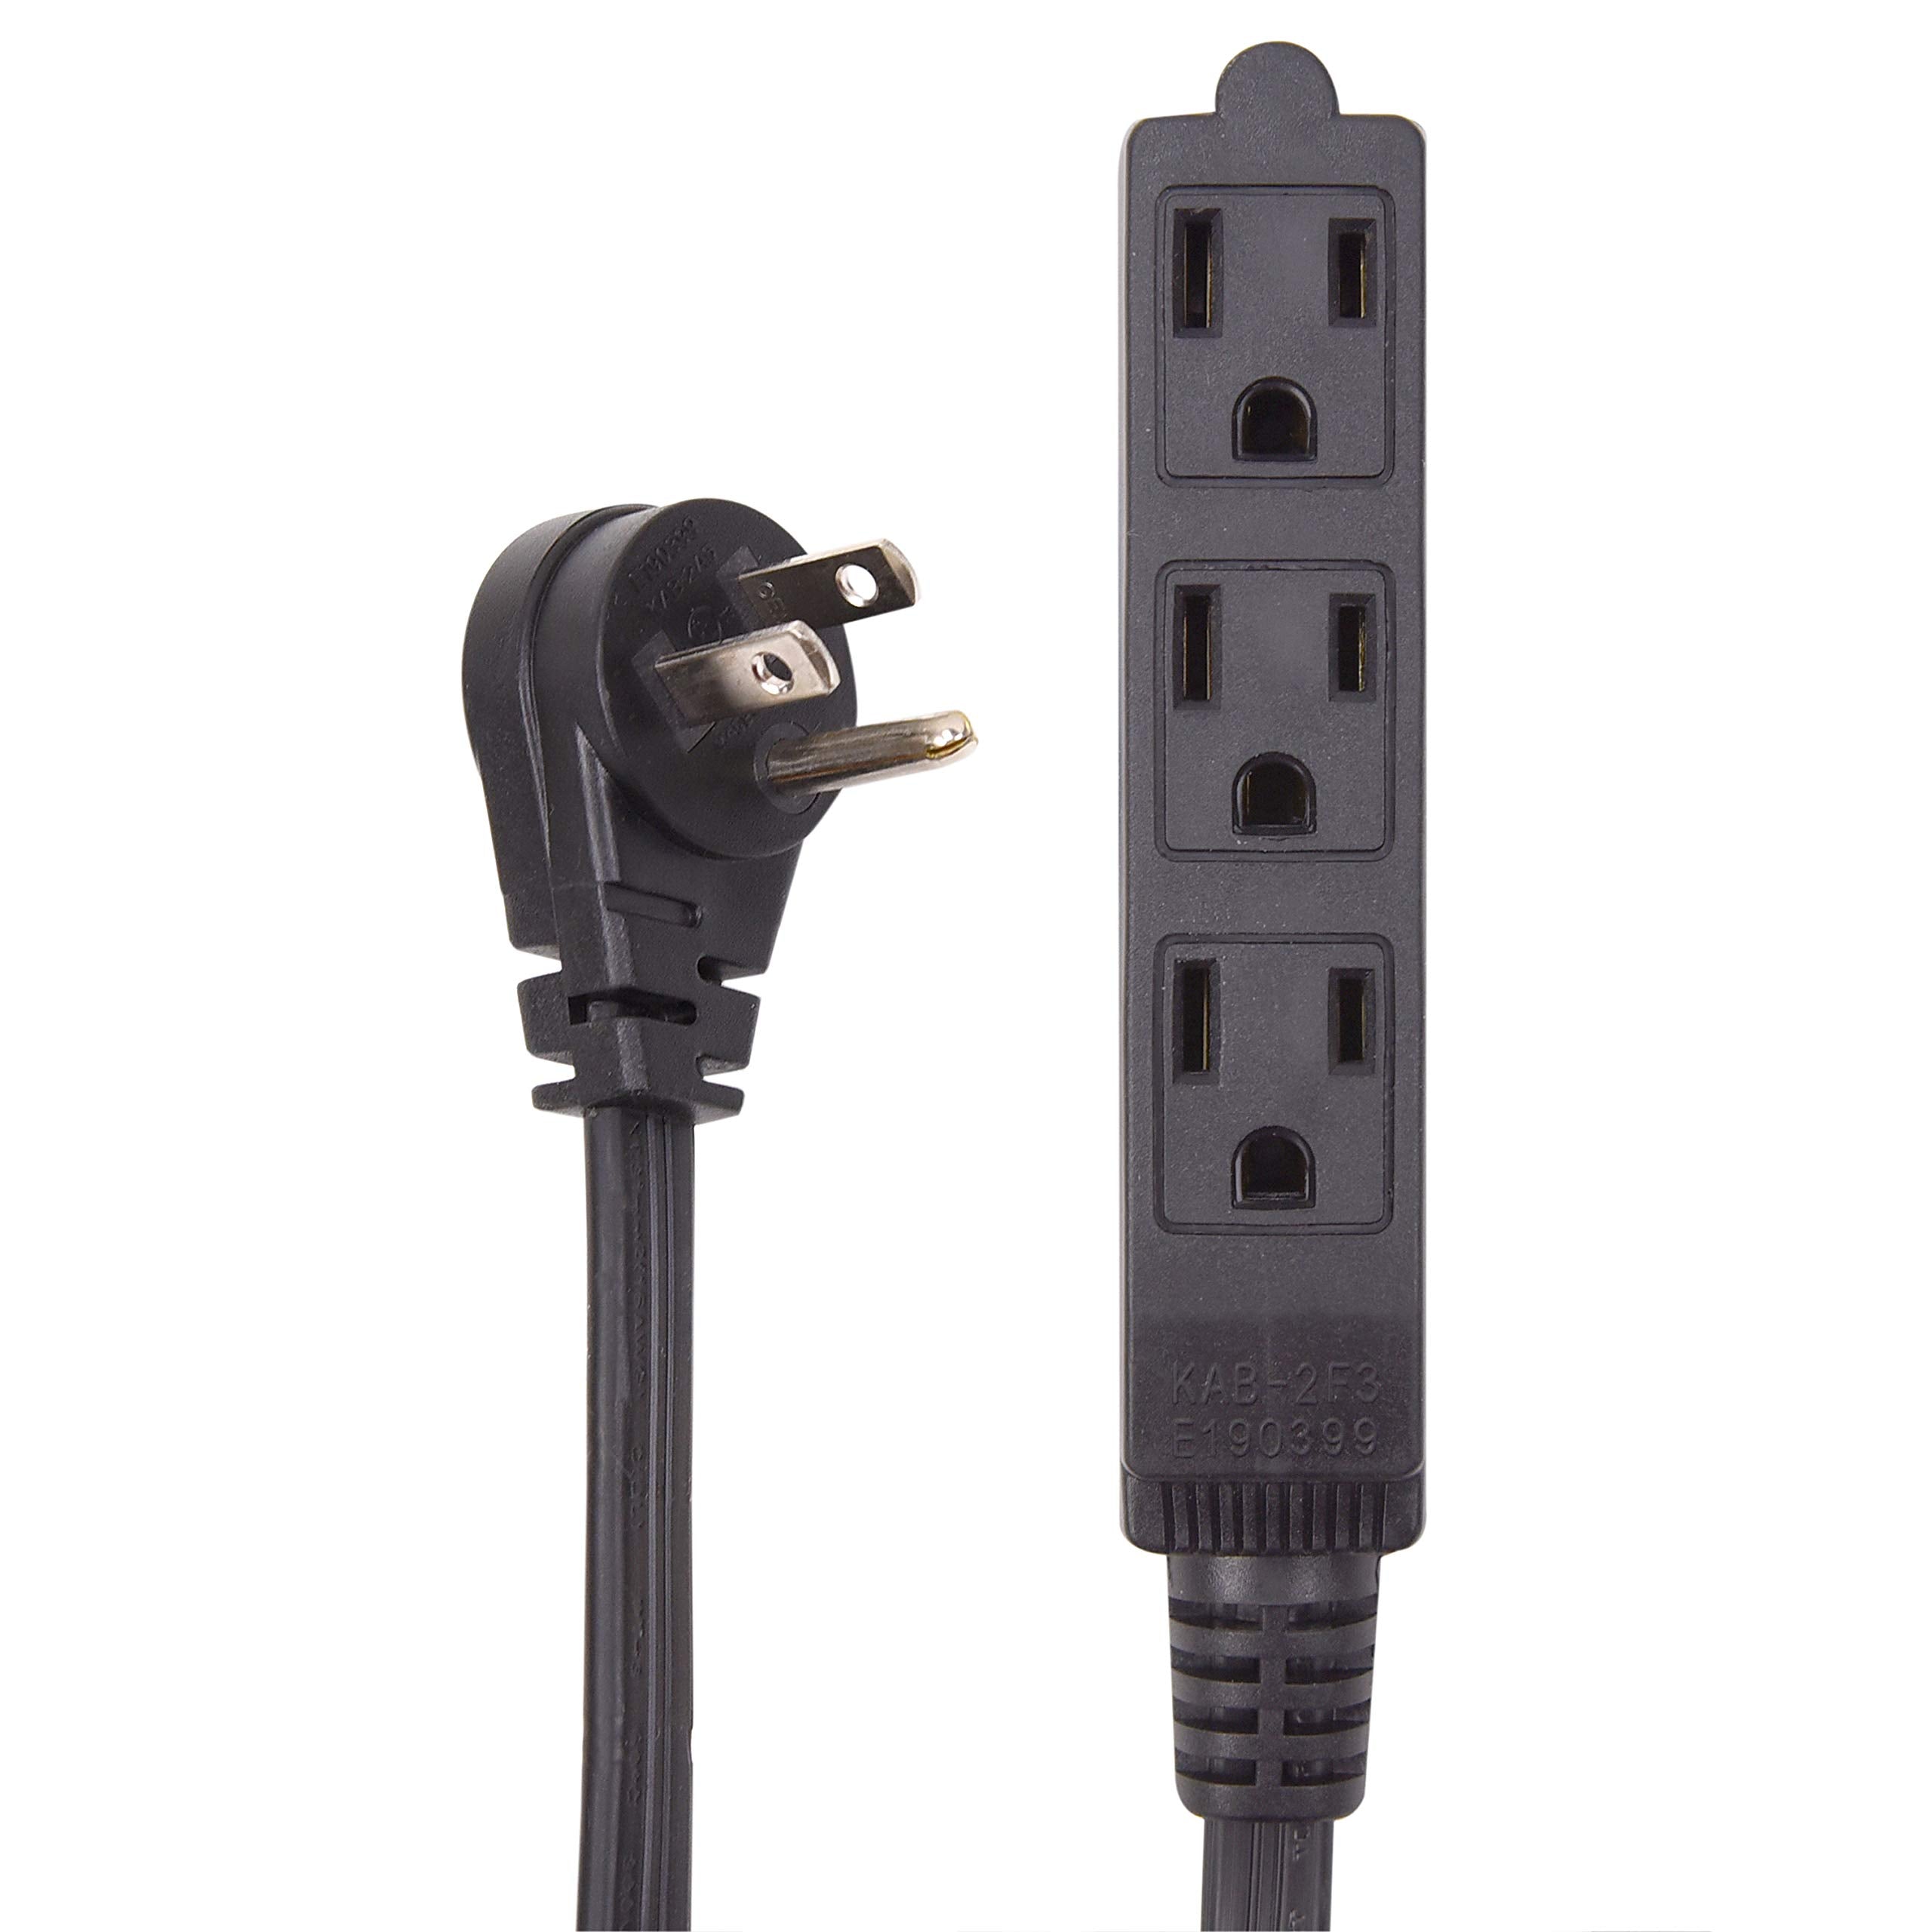 Flat Multiple Outlet Extension Cord for Indoor Use by Electes- UL-Listed 3-Prong Multi Extension Wire- Space-Saving Flat Angled Extension Cord- Black  - Like New